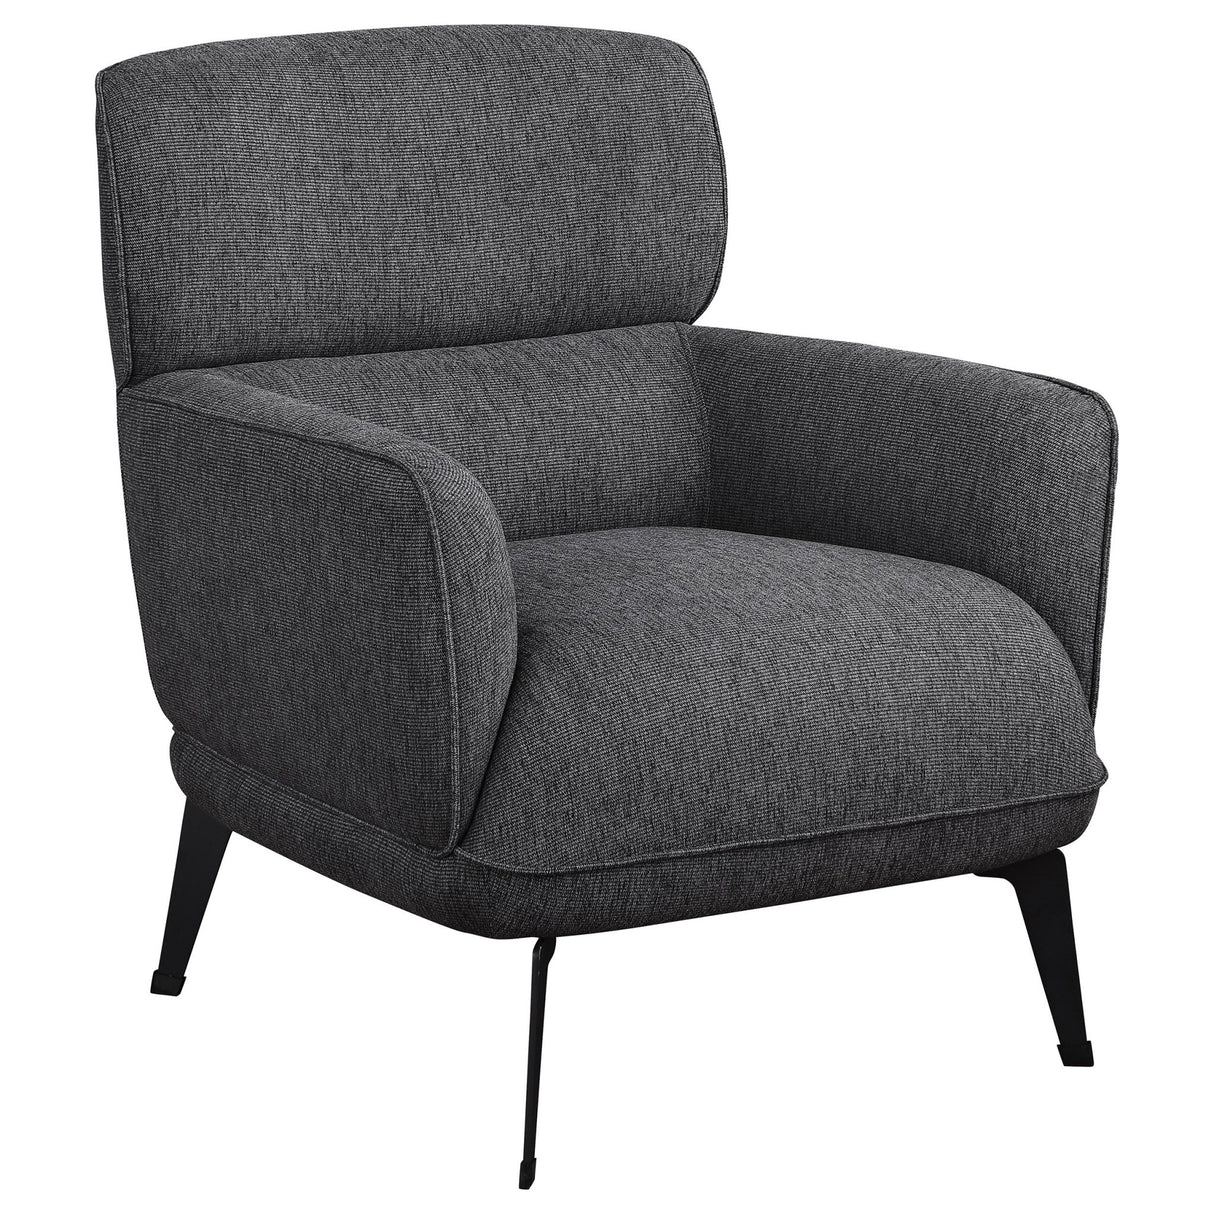 Accent Chair - Andrea Heavy Duty High Back Accent Chair Grey - Accent Chairs - 903082 - image - 1